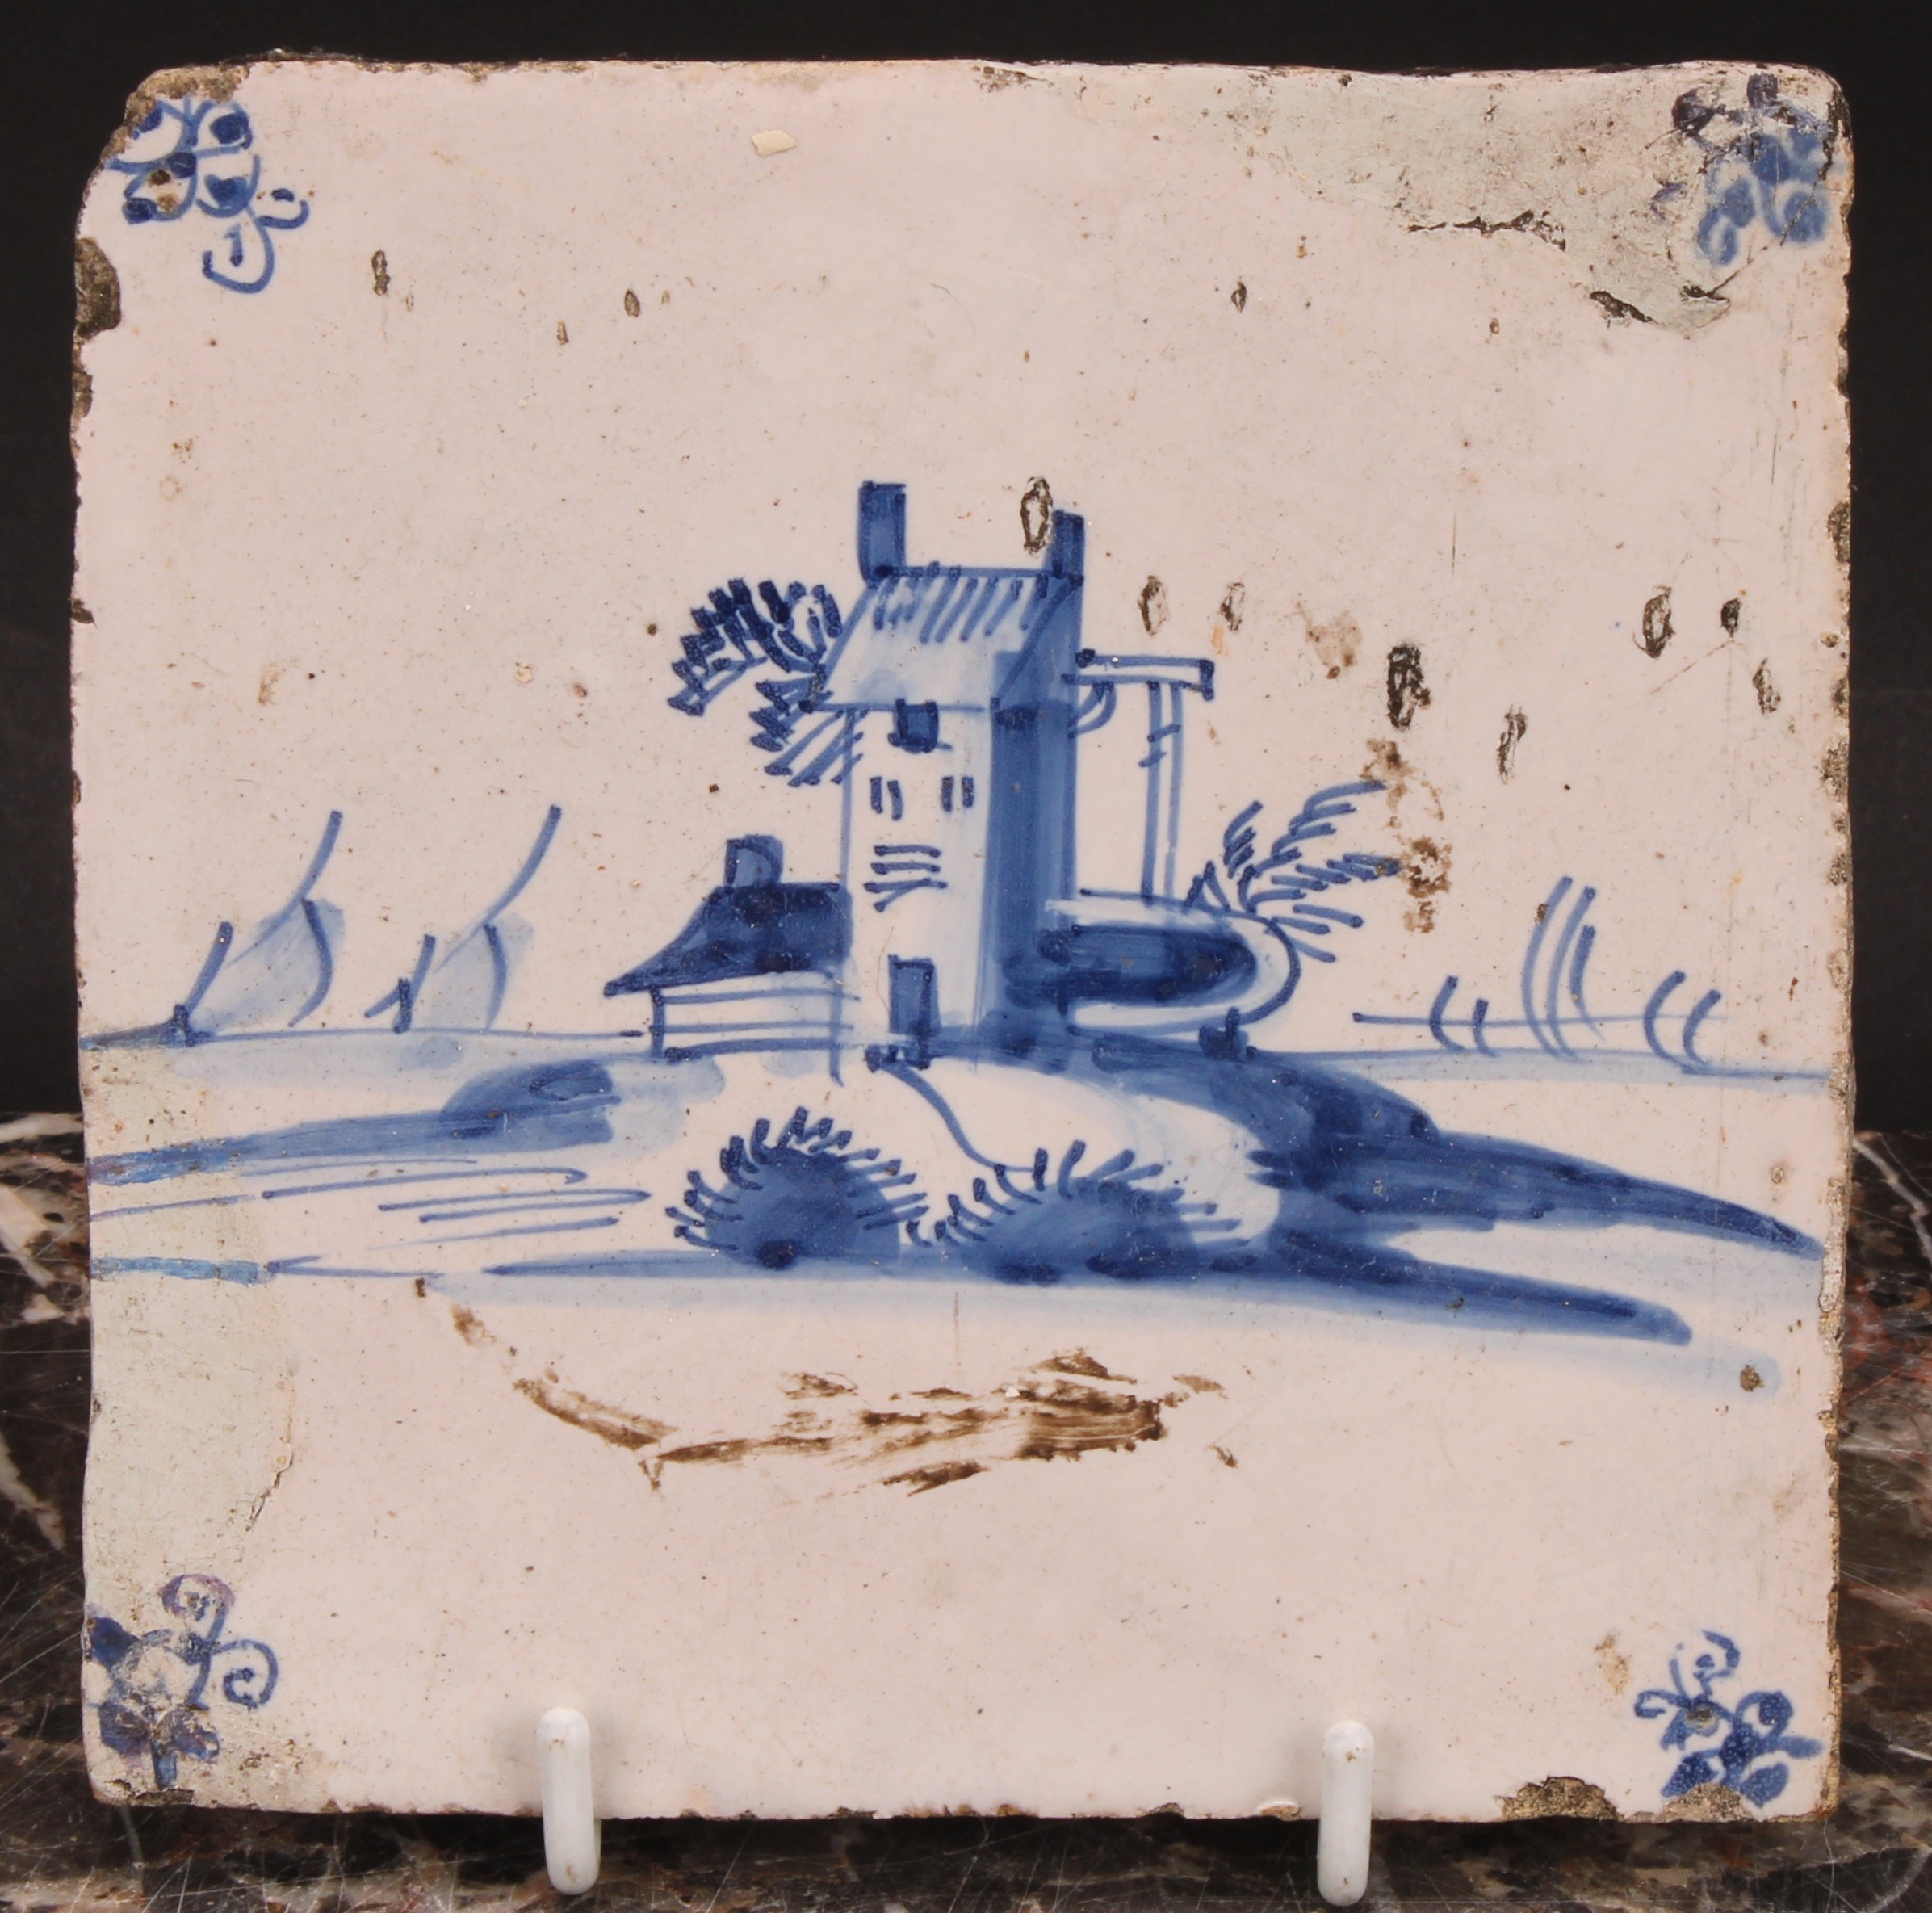 A harlequin suite of four 18th century Delft tiles, polychrome and traditional (4) - Image 5 of 6